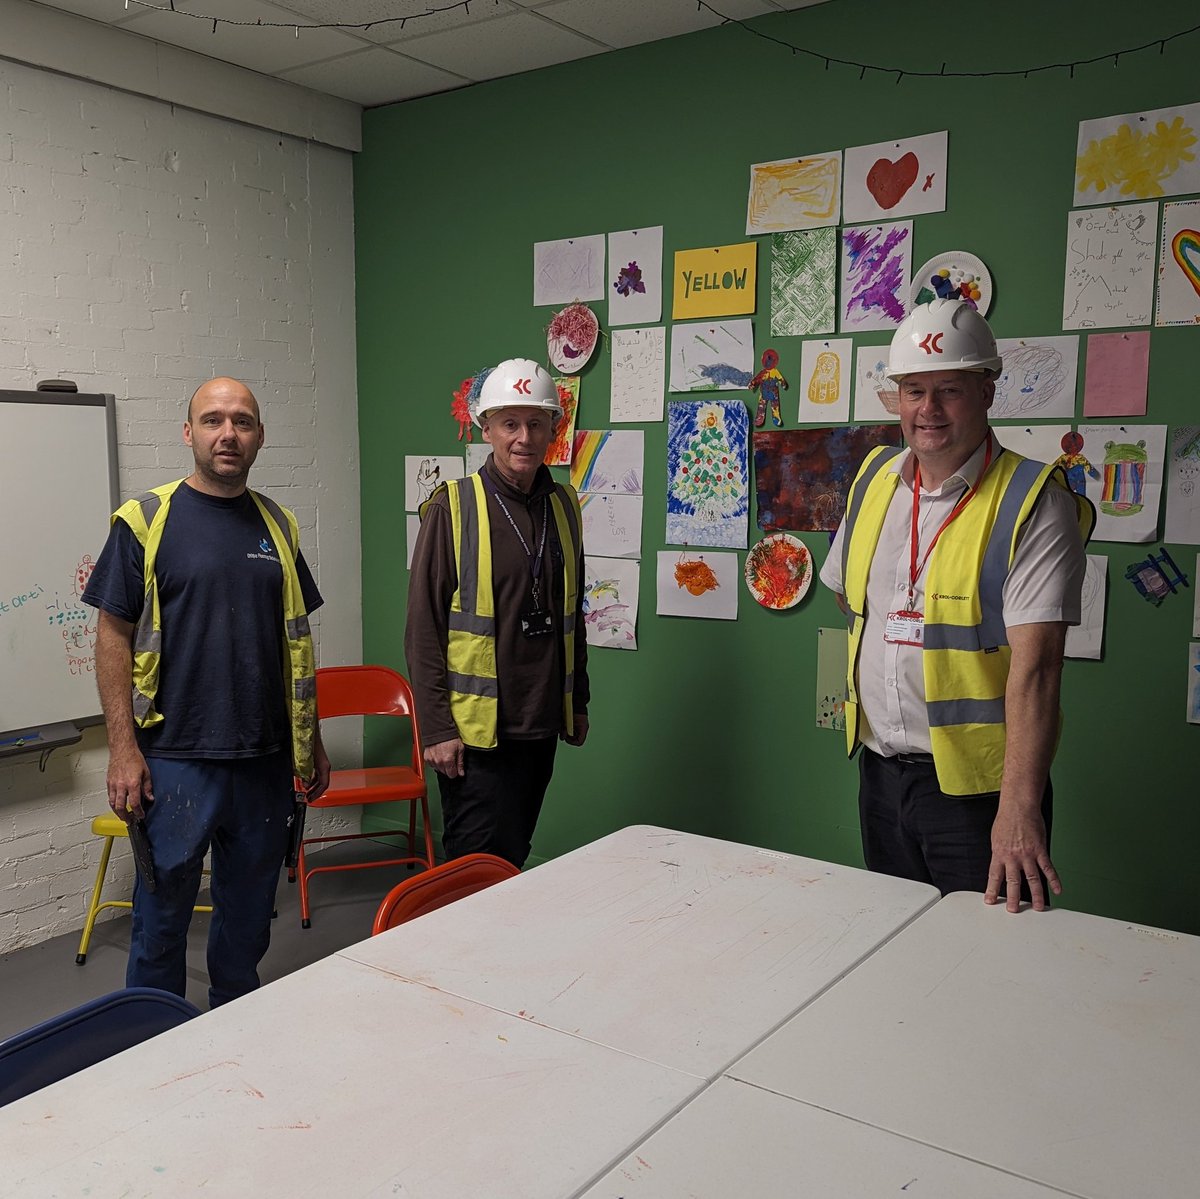 Say hello to Wayne,  Chris &  Paul 👋👇👇from @krolcorlett who are helping us with our floor! 😱
Who knew vinyl flooring could be so exciting 🤣  💃🕺 #wecandance
 #swinton #pendlebury #community #arts #family @swintonpendle #CommunityDevelopment